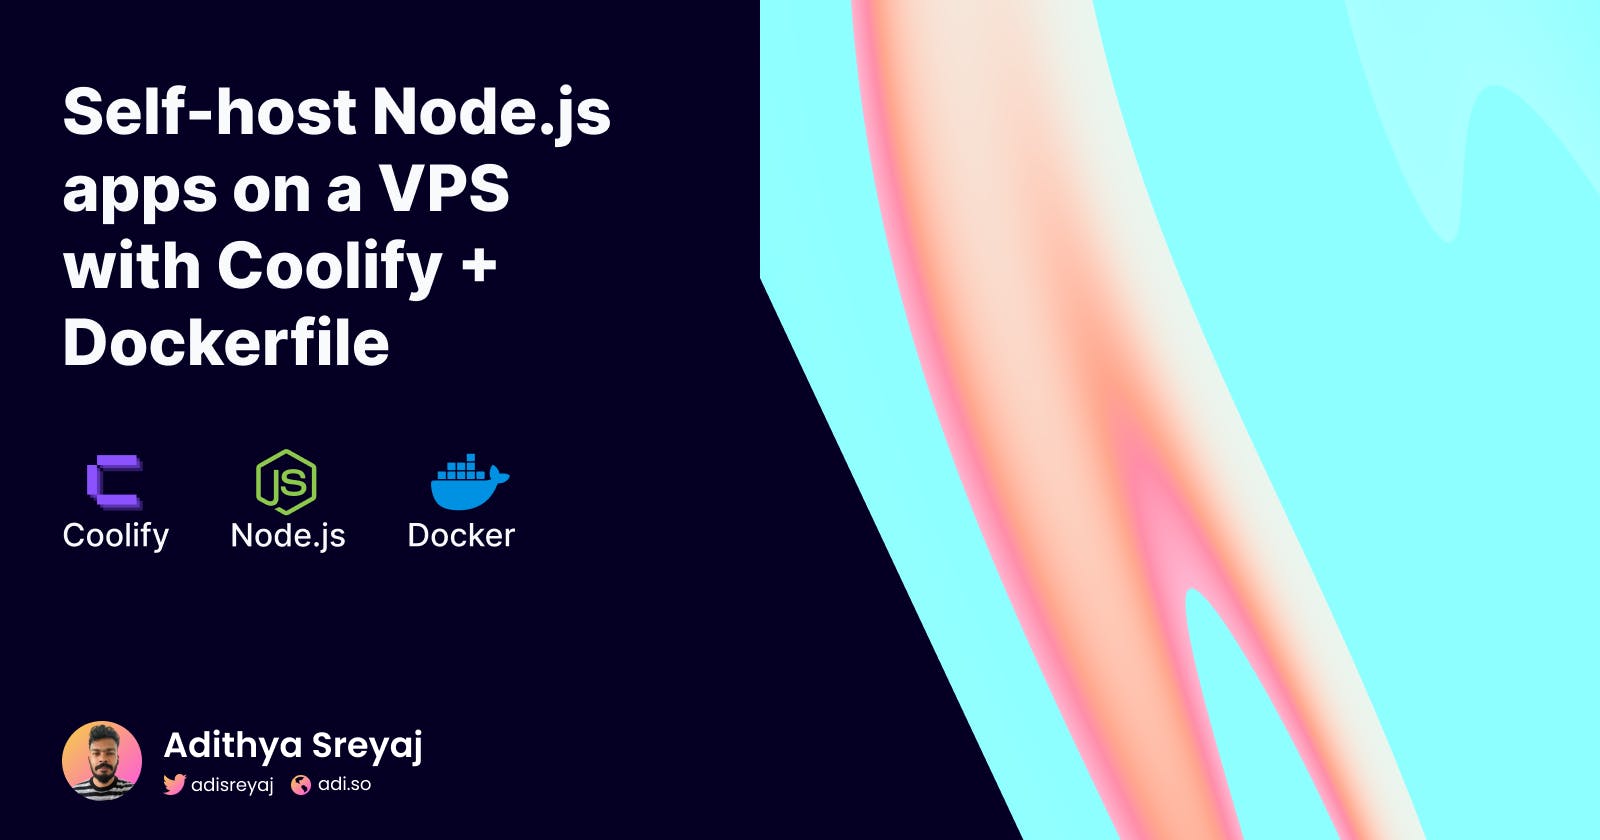 Deploy Node.js applications on a VPS using Coolify with Dockerfile